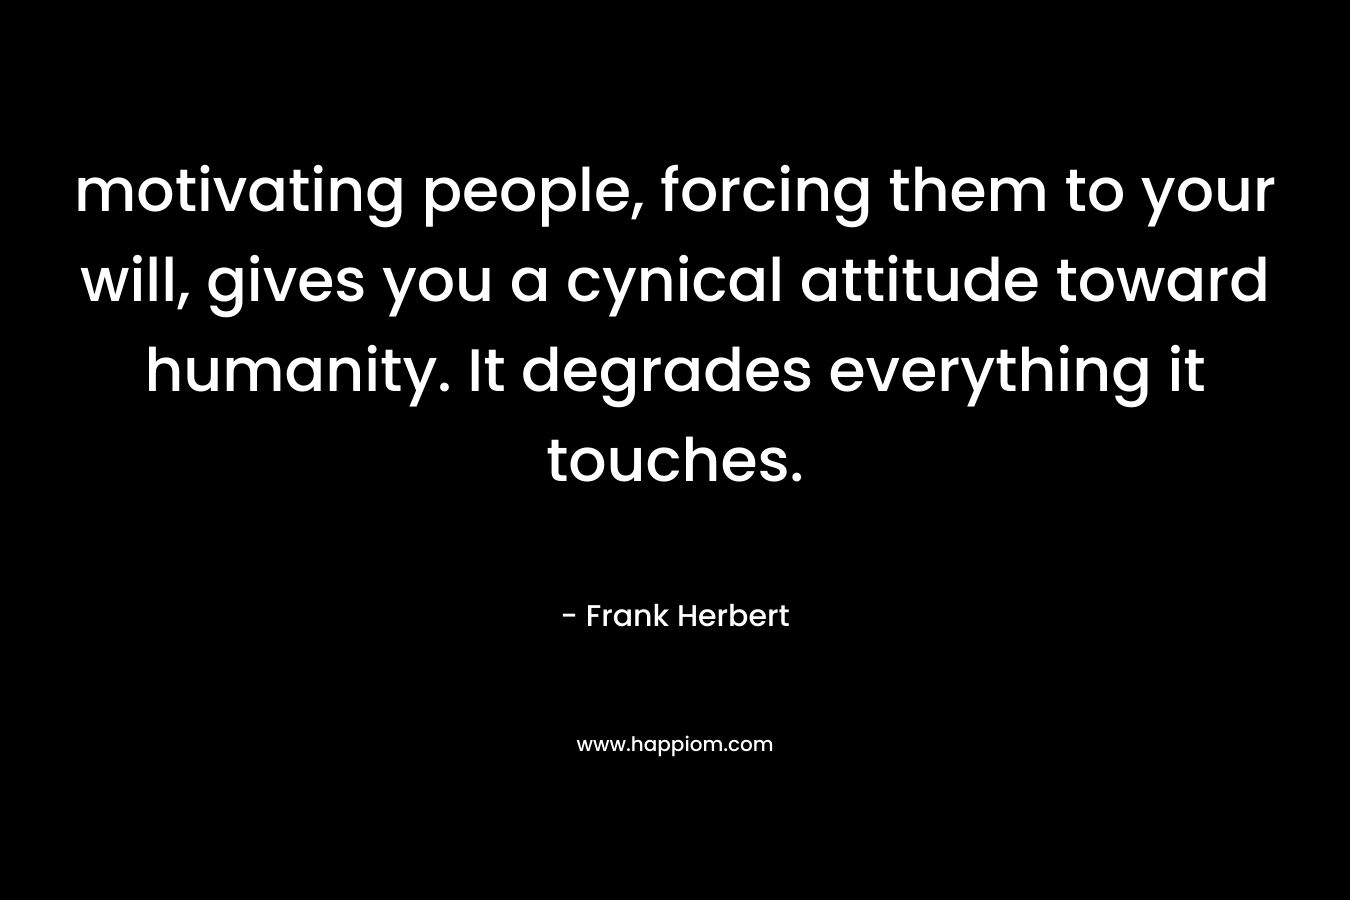 motivating people, forcing them to your will, gives you a cynical attitude toward humanity. It degrades everything it touches.